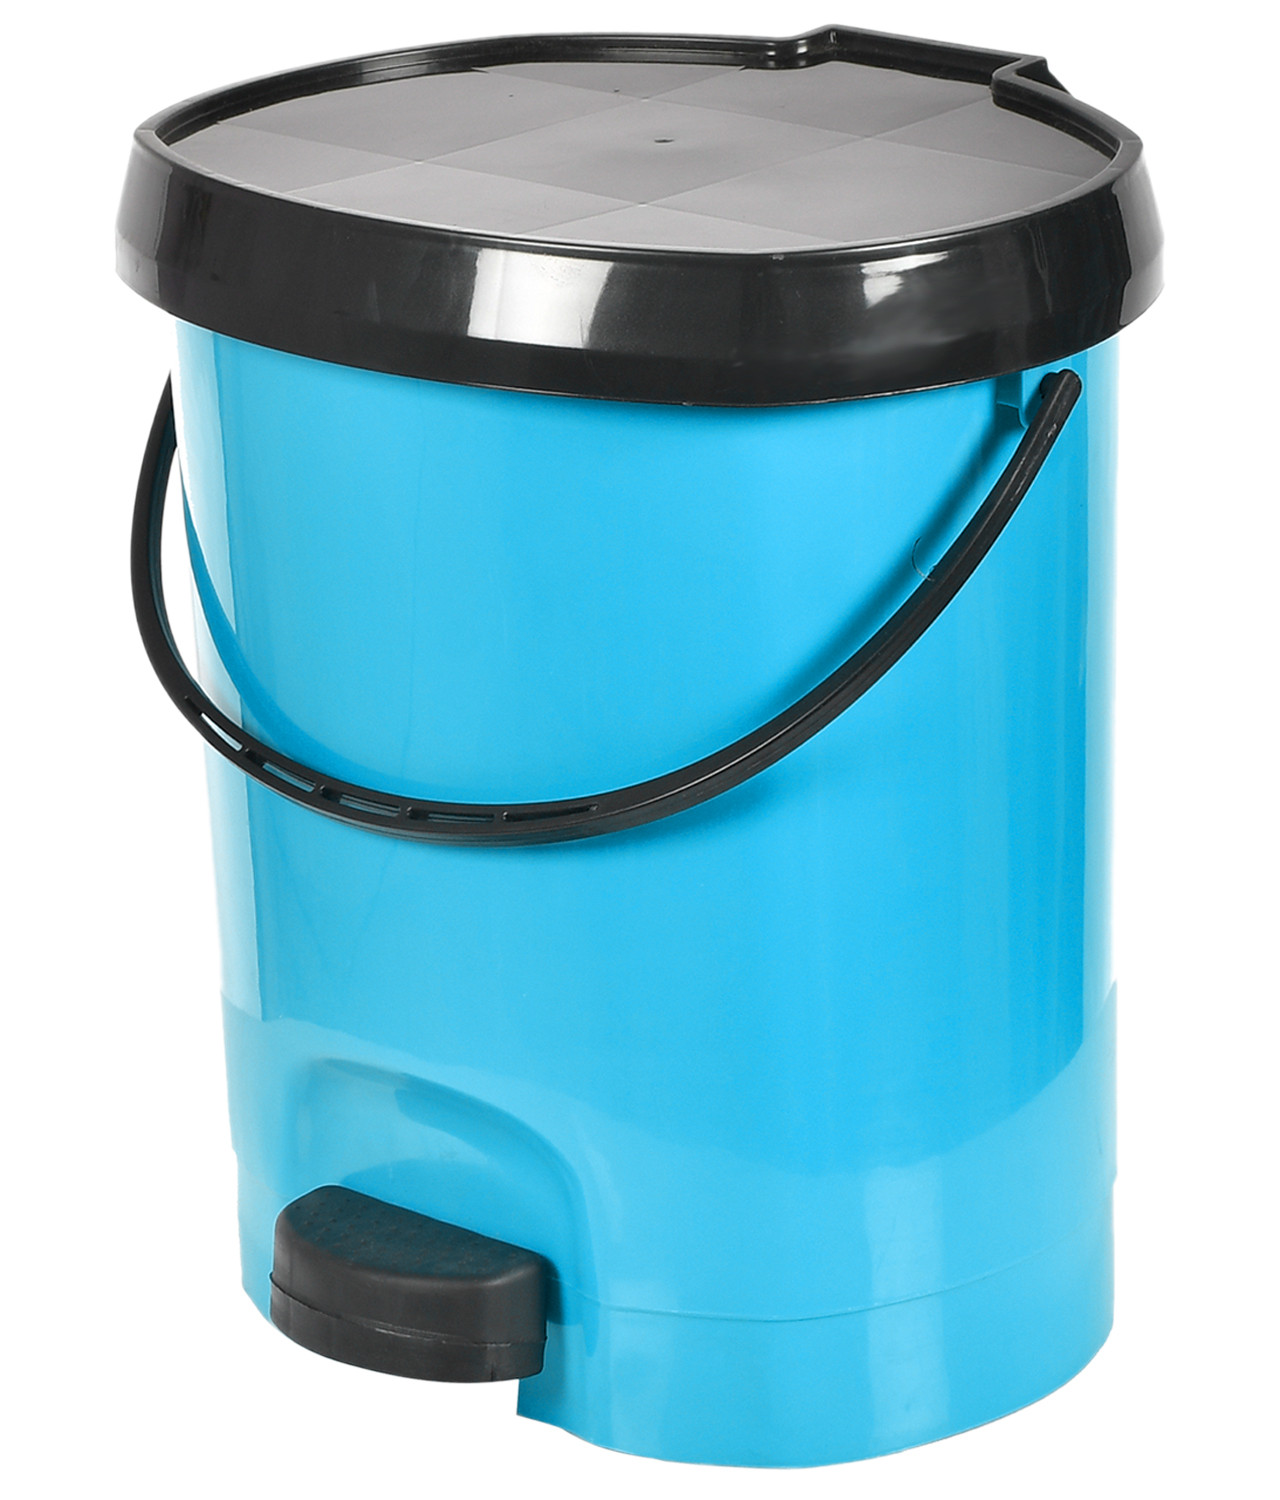 Kuber Industries Multiuses Plastic Pedal Dustbin, Waste Bin, Trash Can With Detachable Bucket, 10 Litre- Pack of 2 (Blue & Brown)-47KM0737